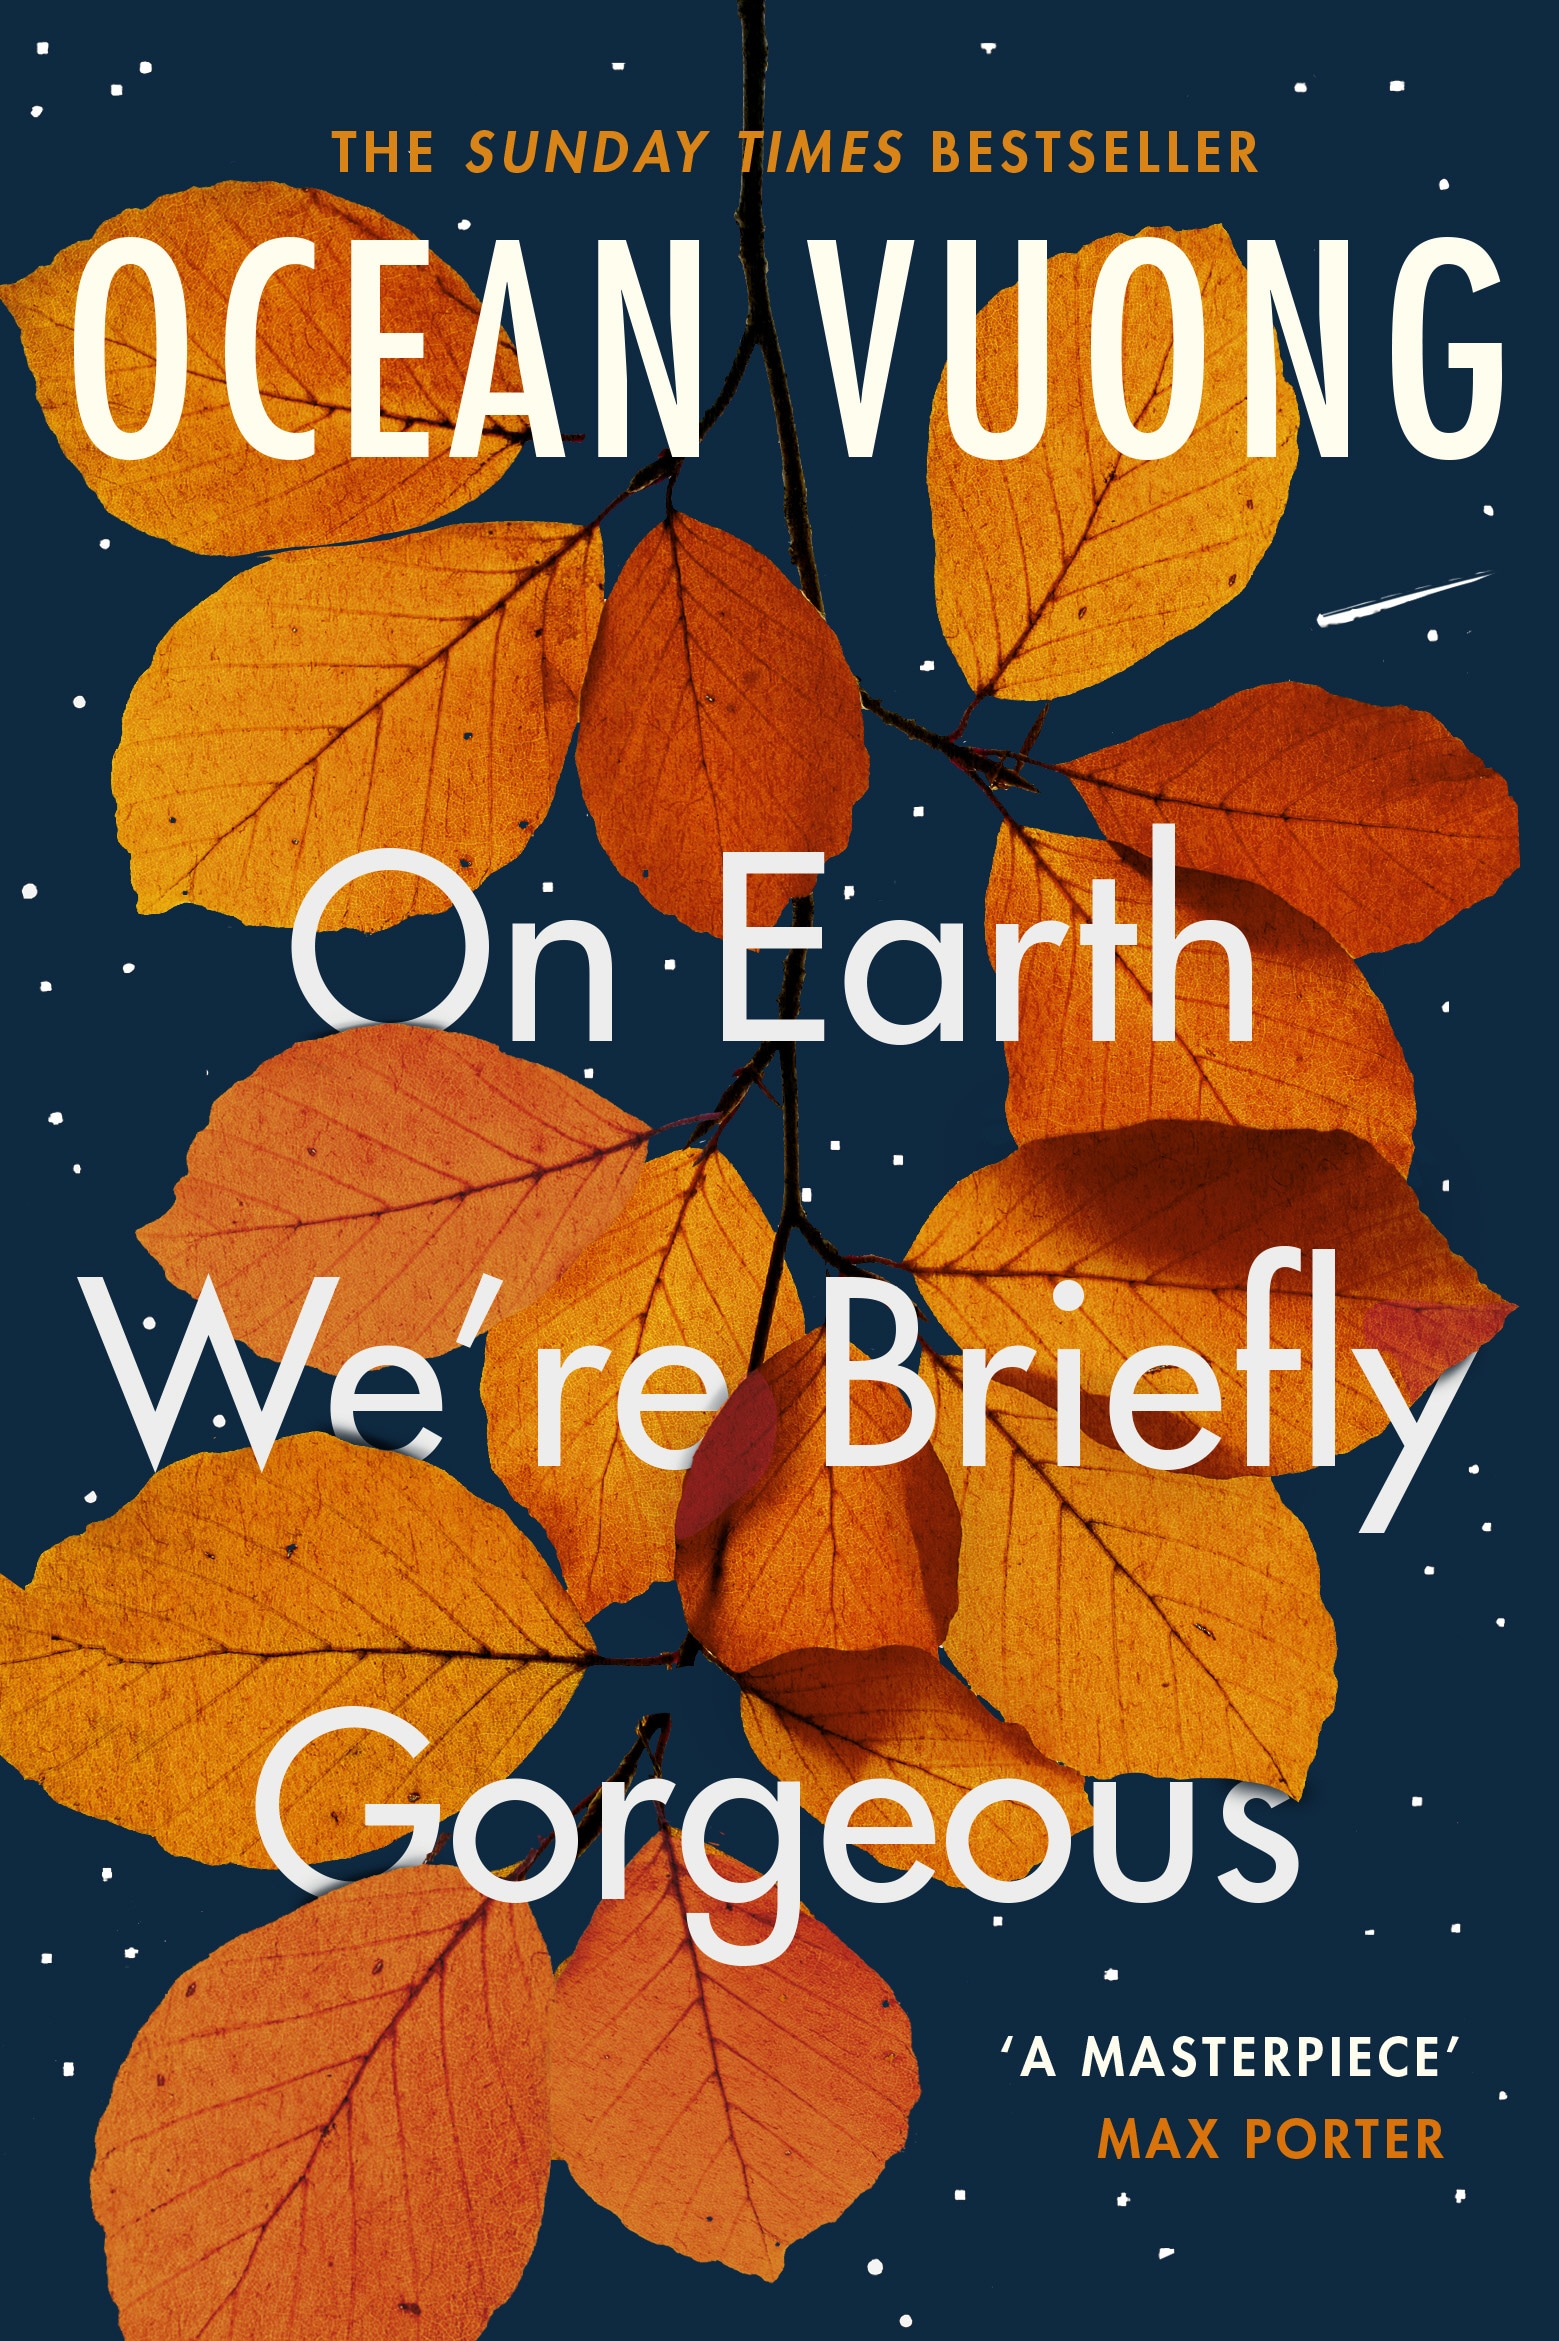 Book “On Earth We're Briefly Gorgeous” by Ocean Vuong — September 1, 2020